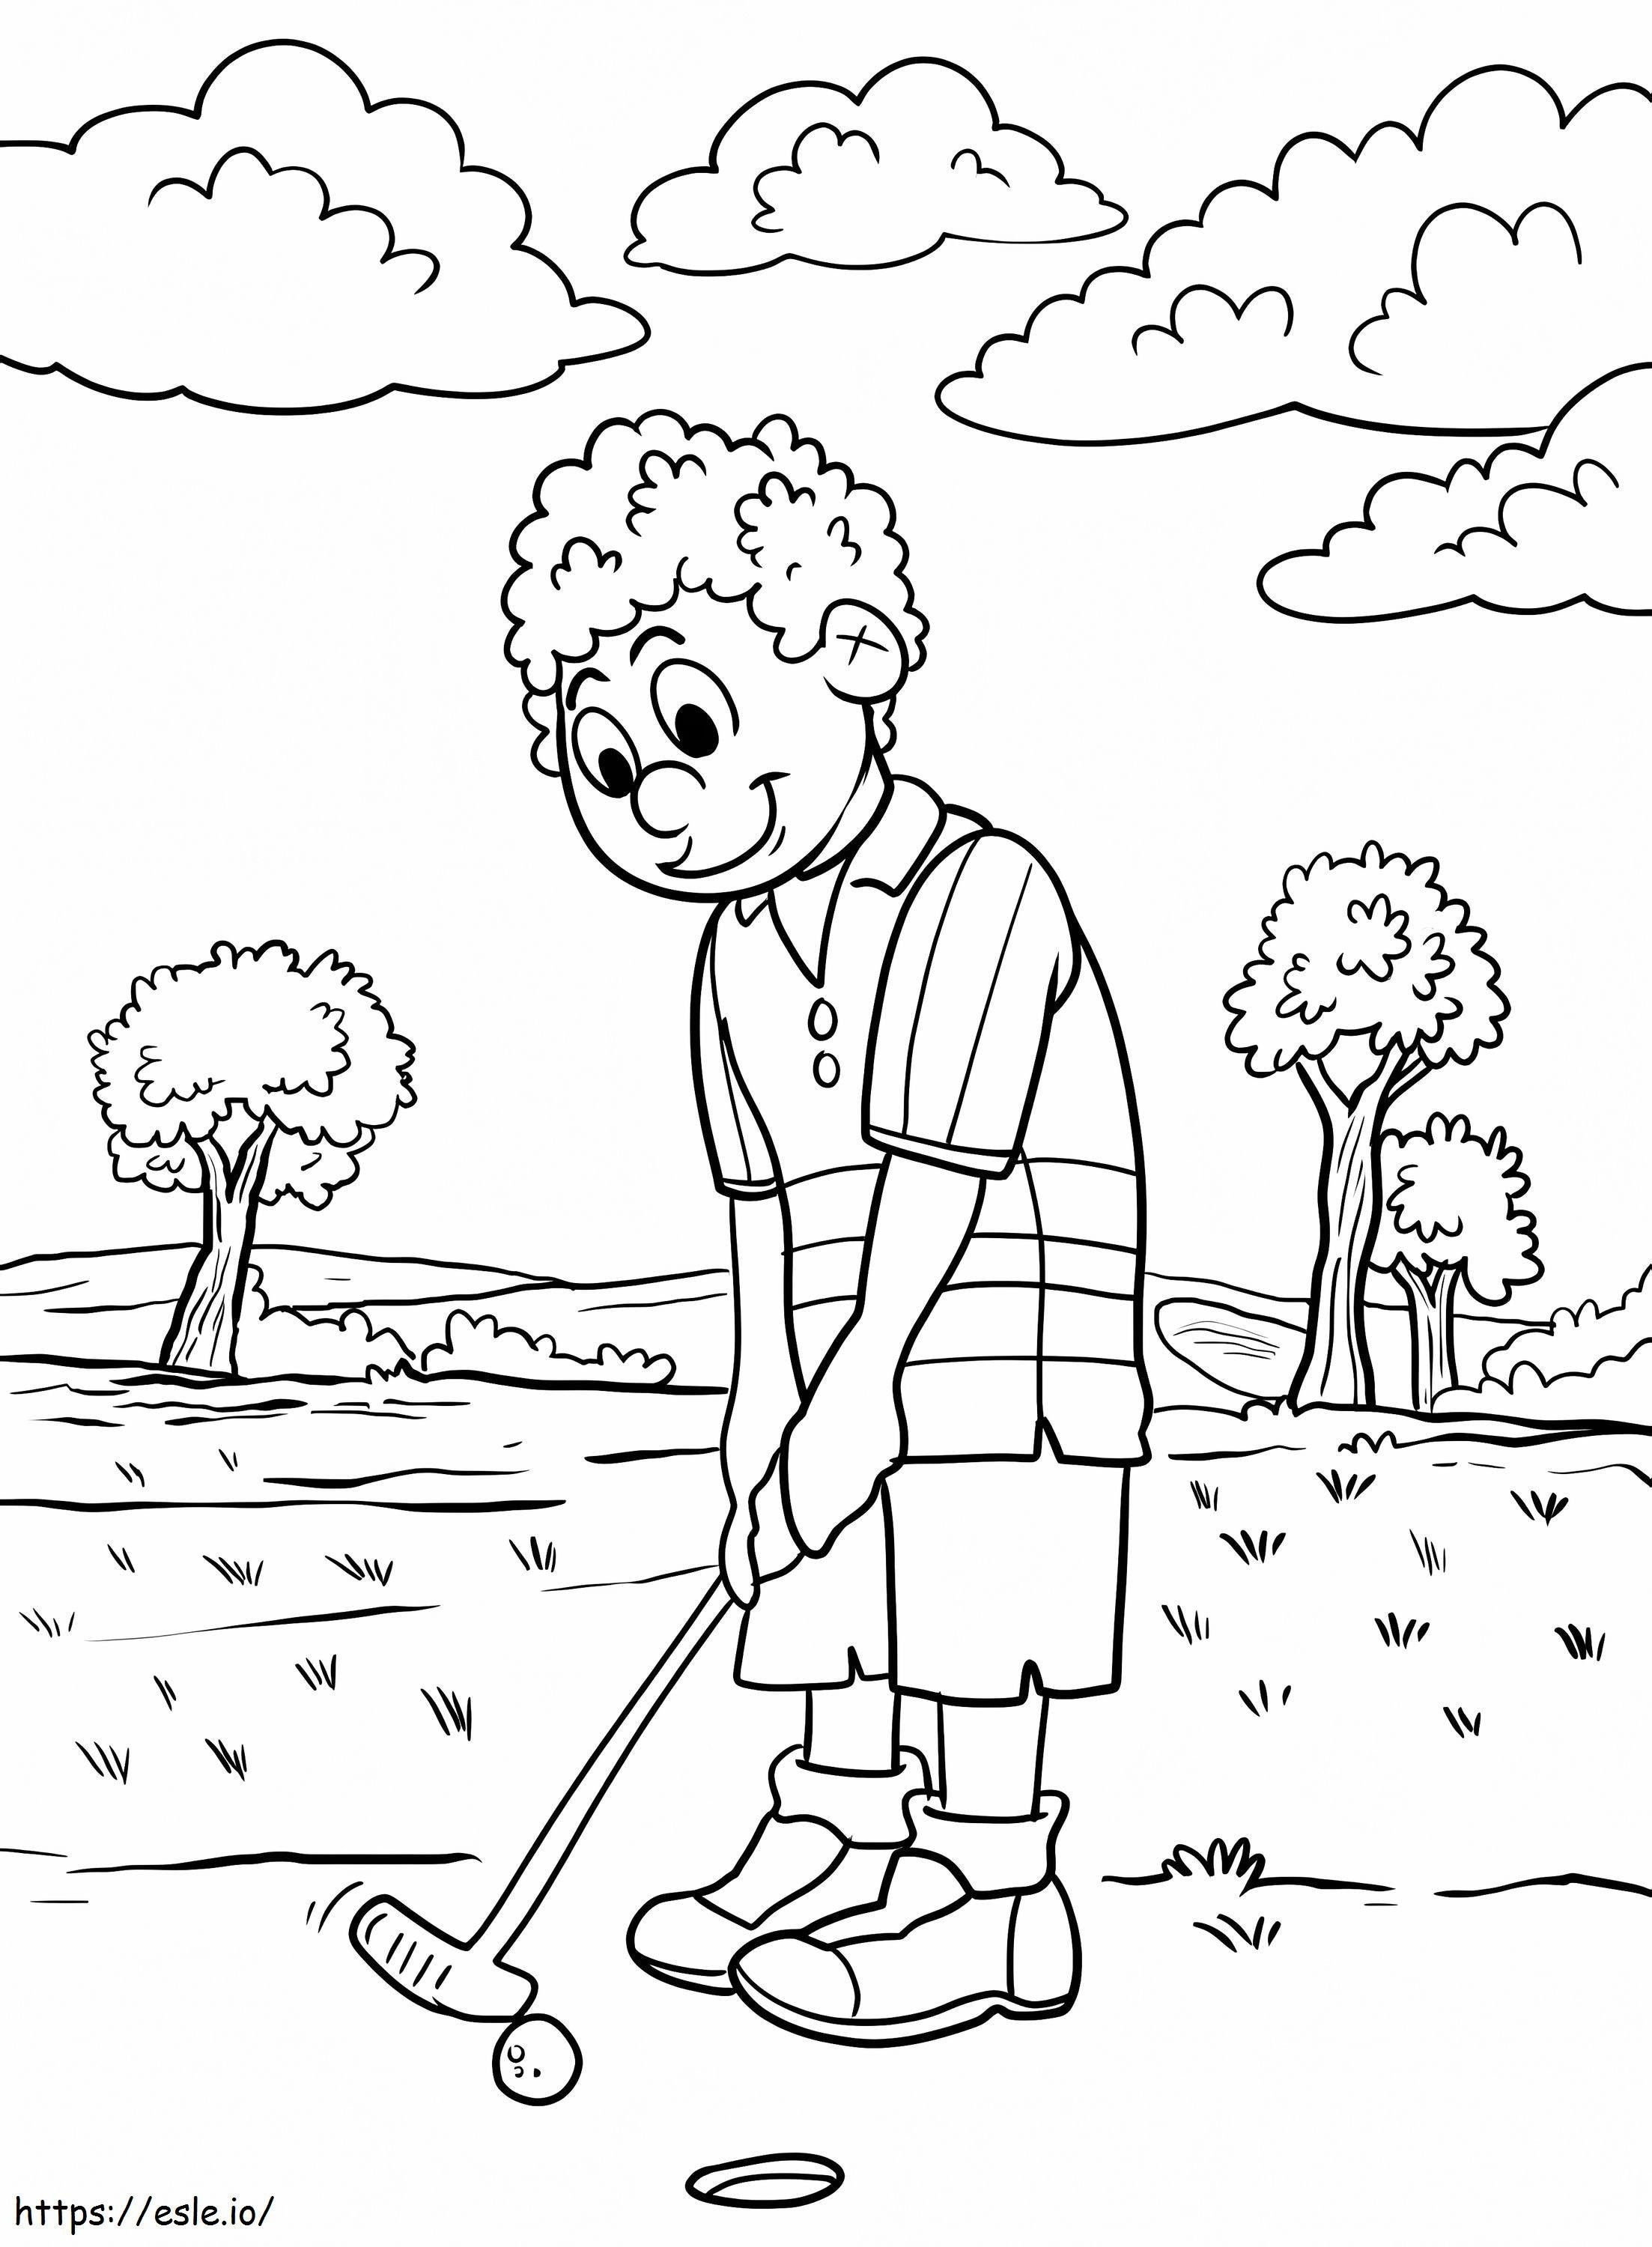 A Guy Playing Golf coloring page